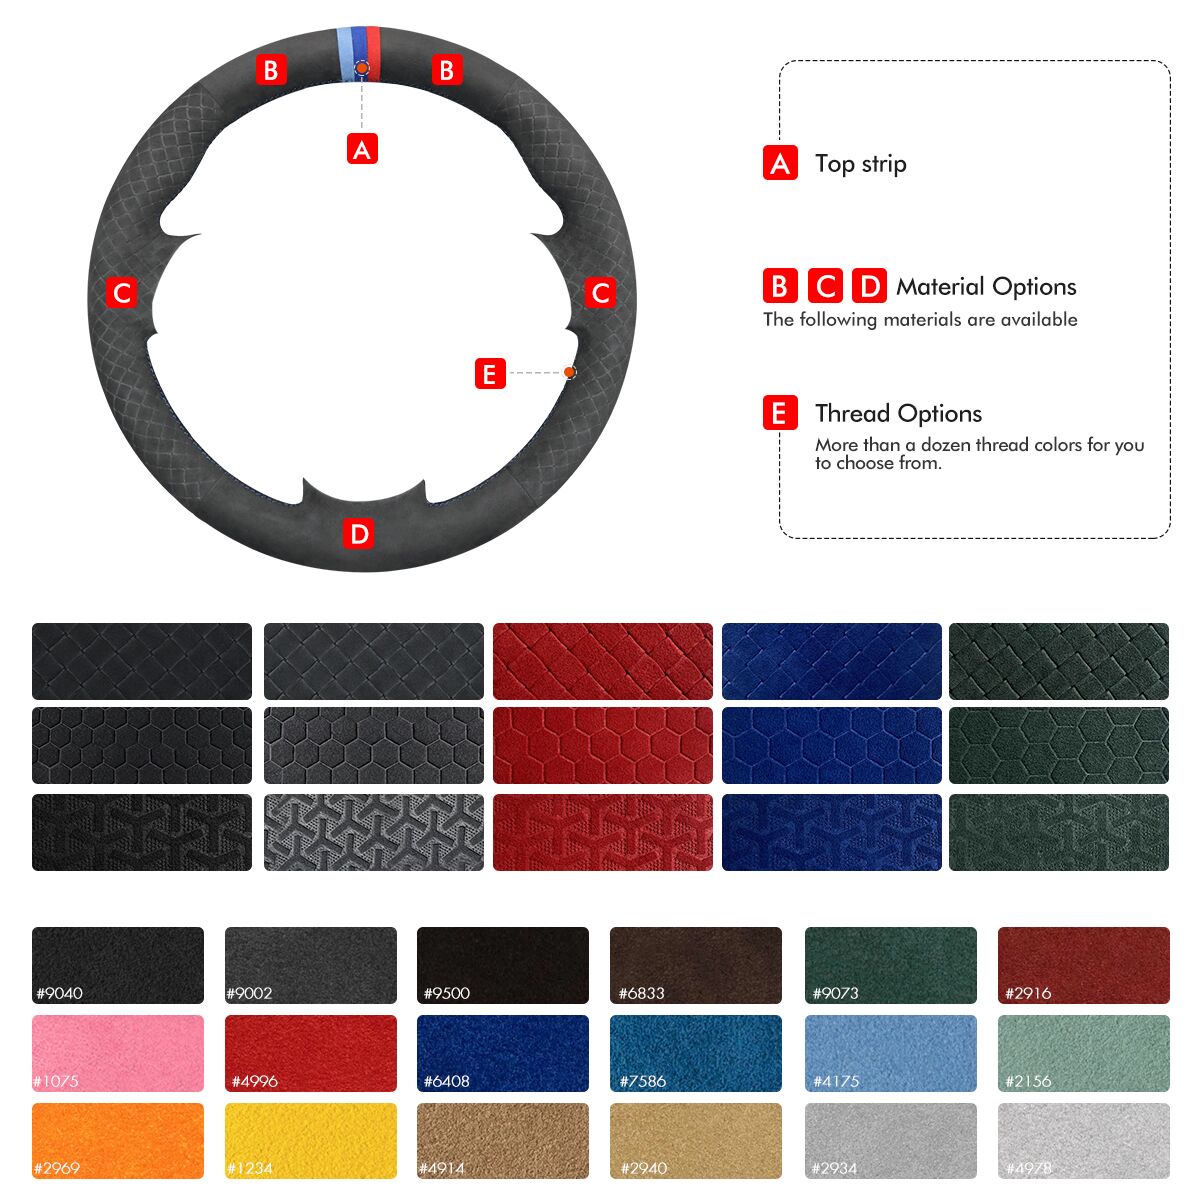 MEWANT Hand Stitch Car Steering Wheel Cover for Toyota Land Cruiser Prado Camry Kluger